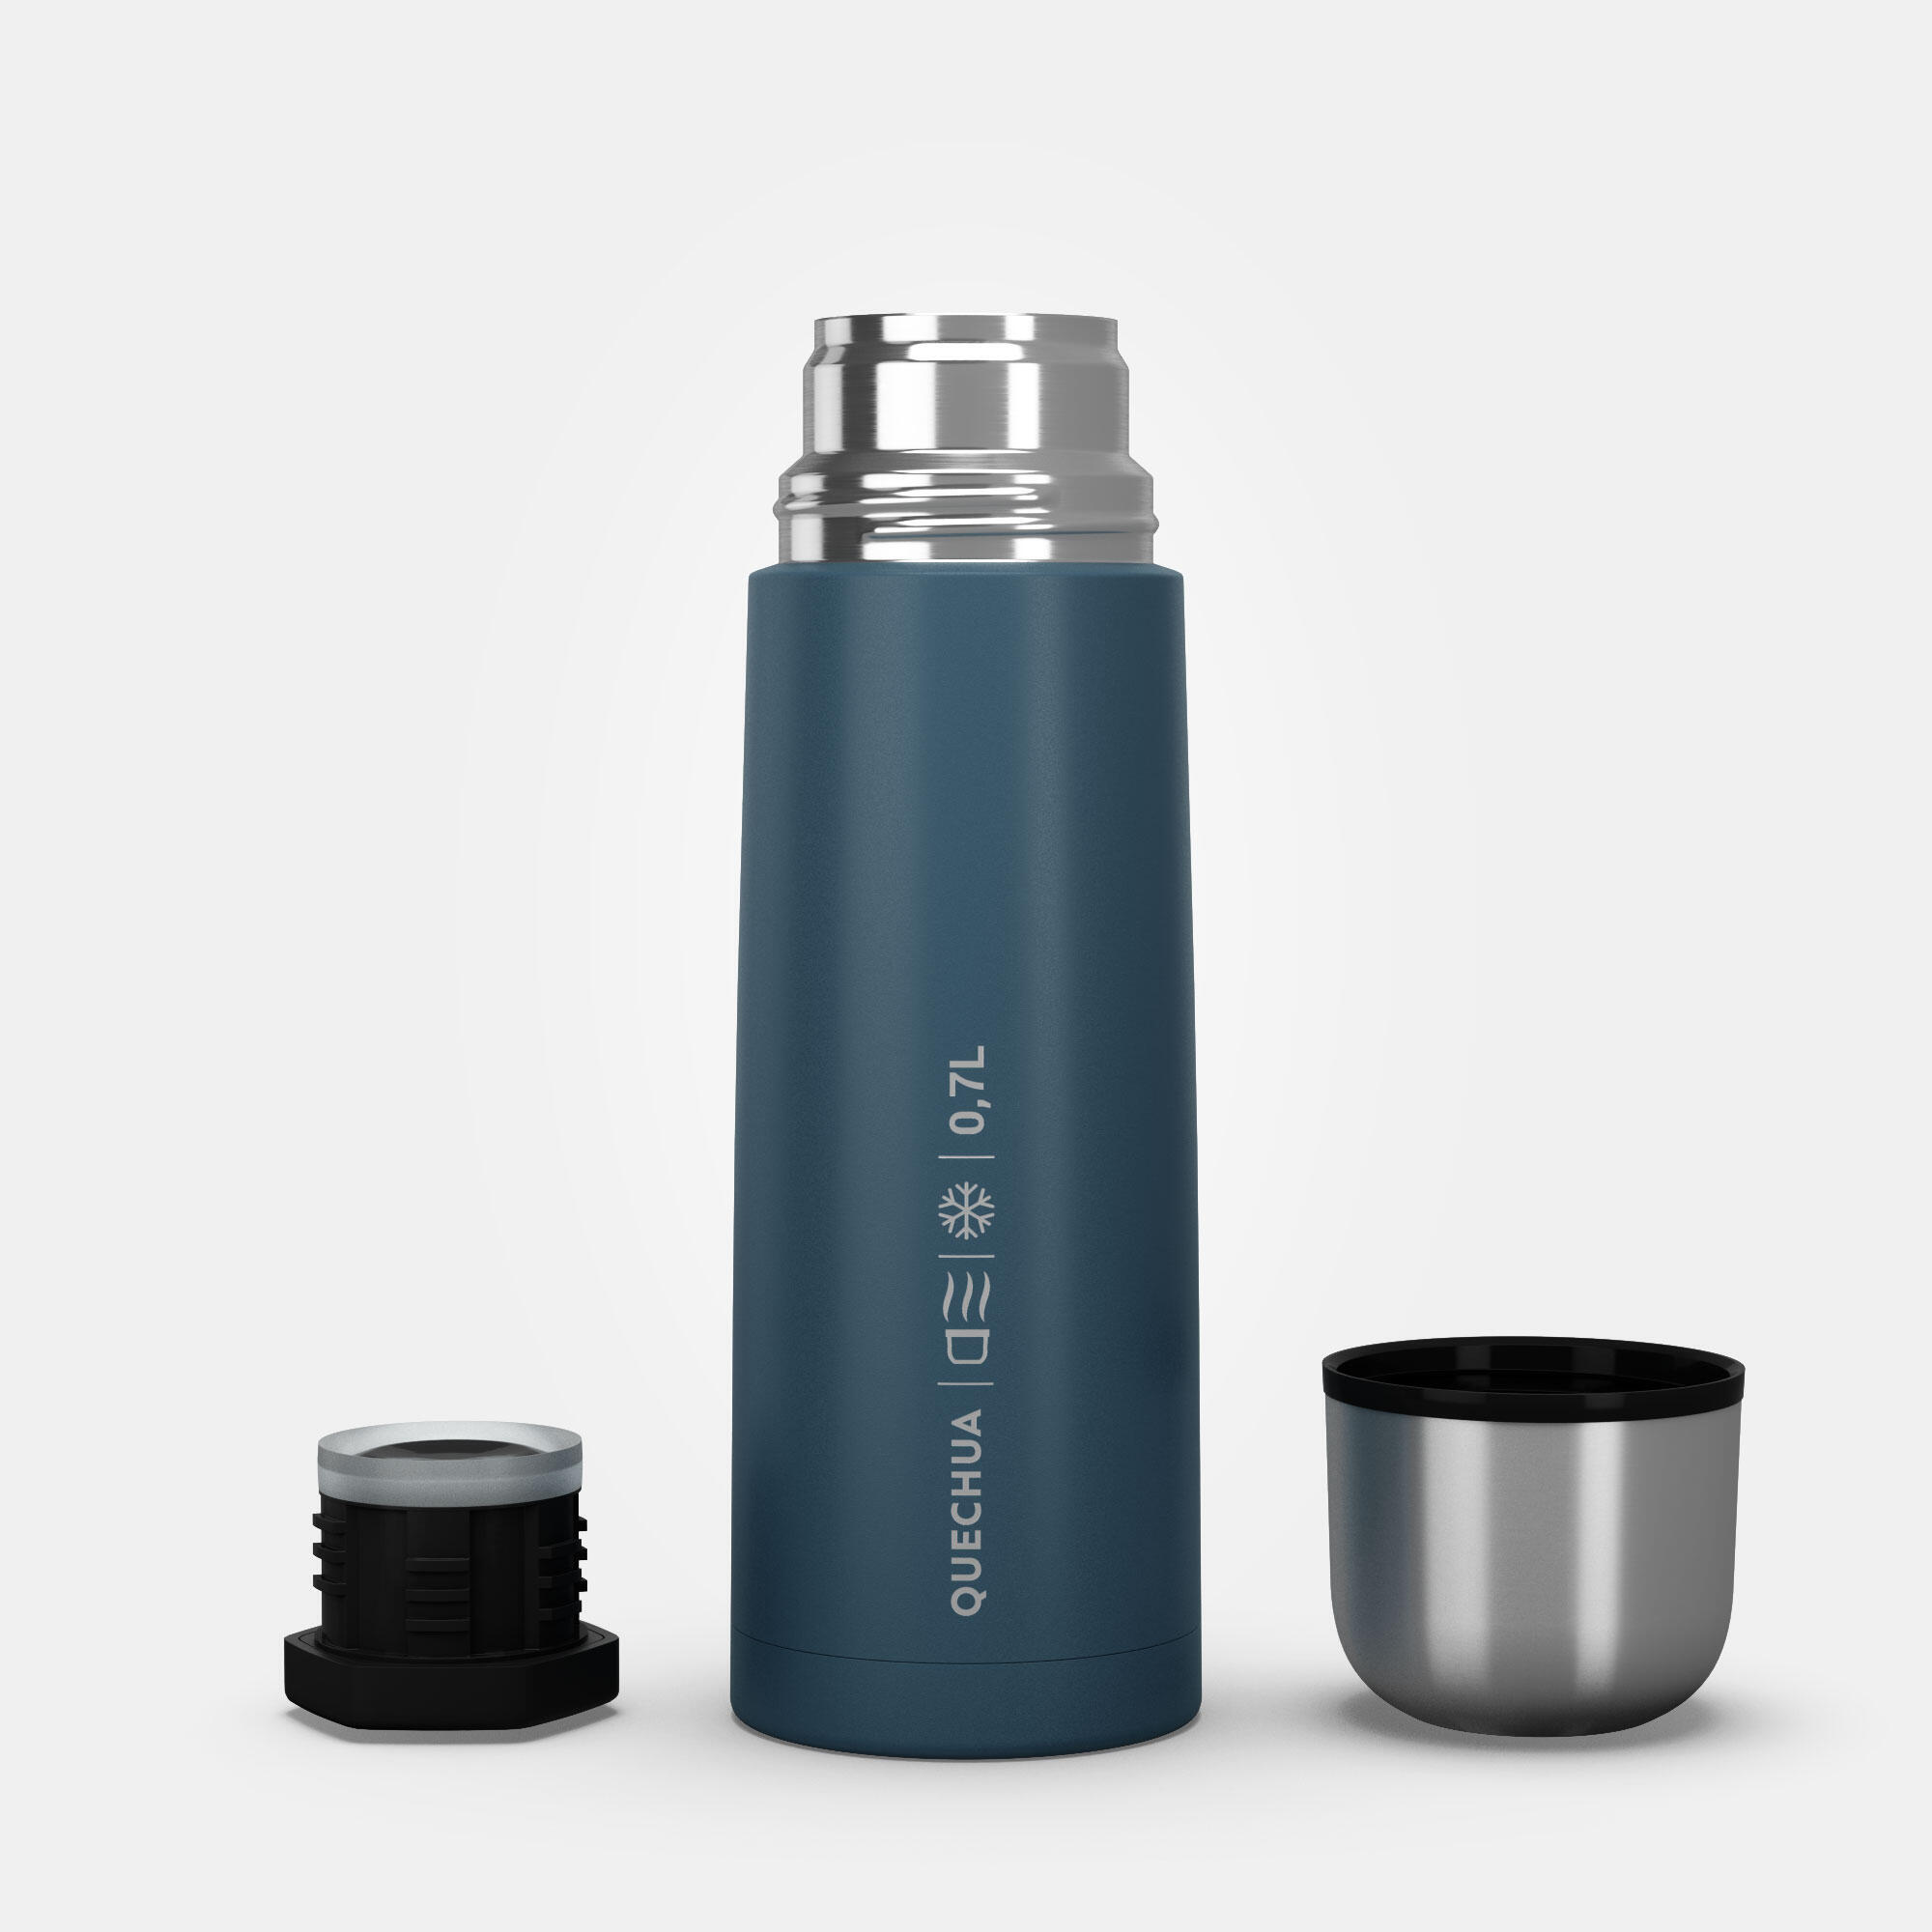 0.7 L stainless steel insulated flask with cup for hiking - Blue 2/10